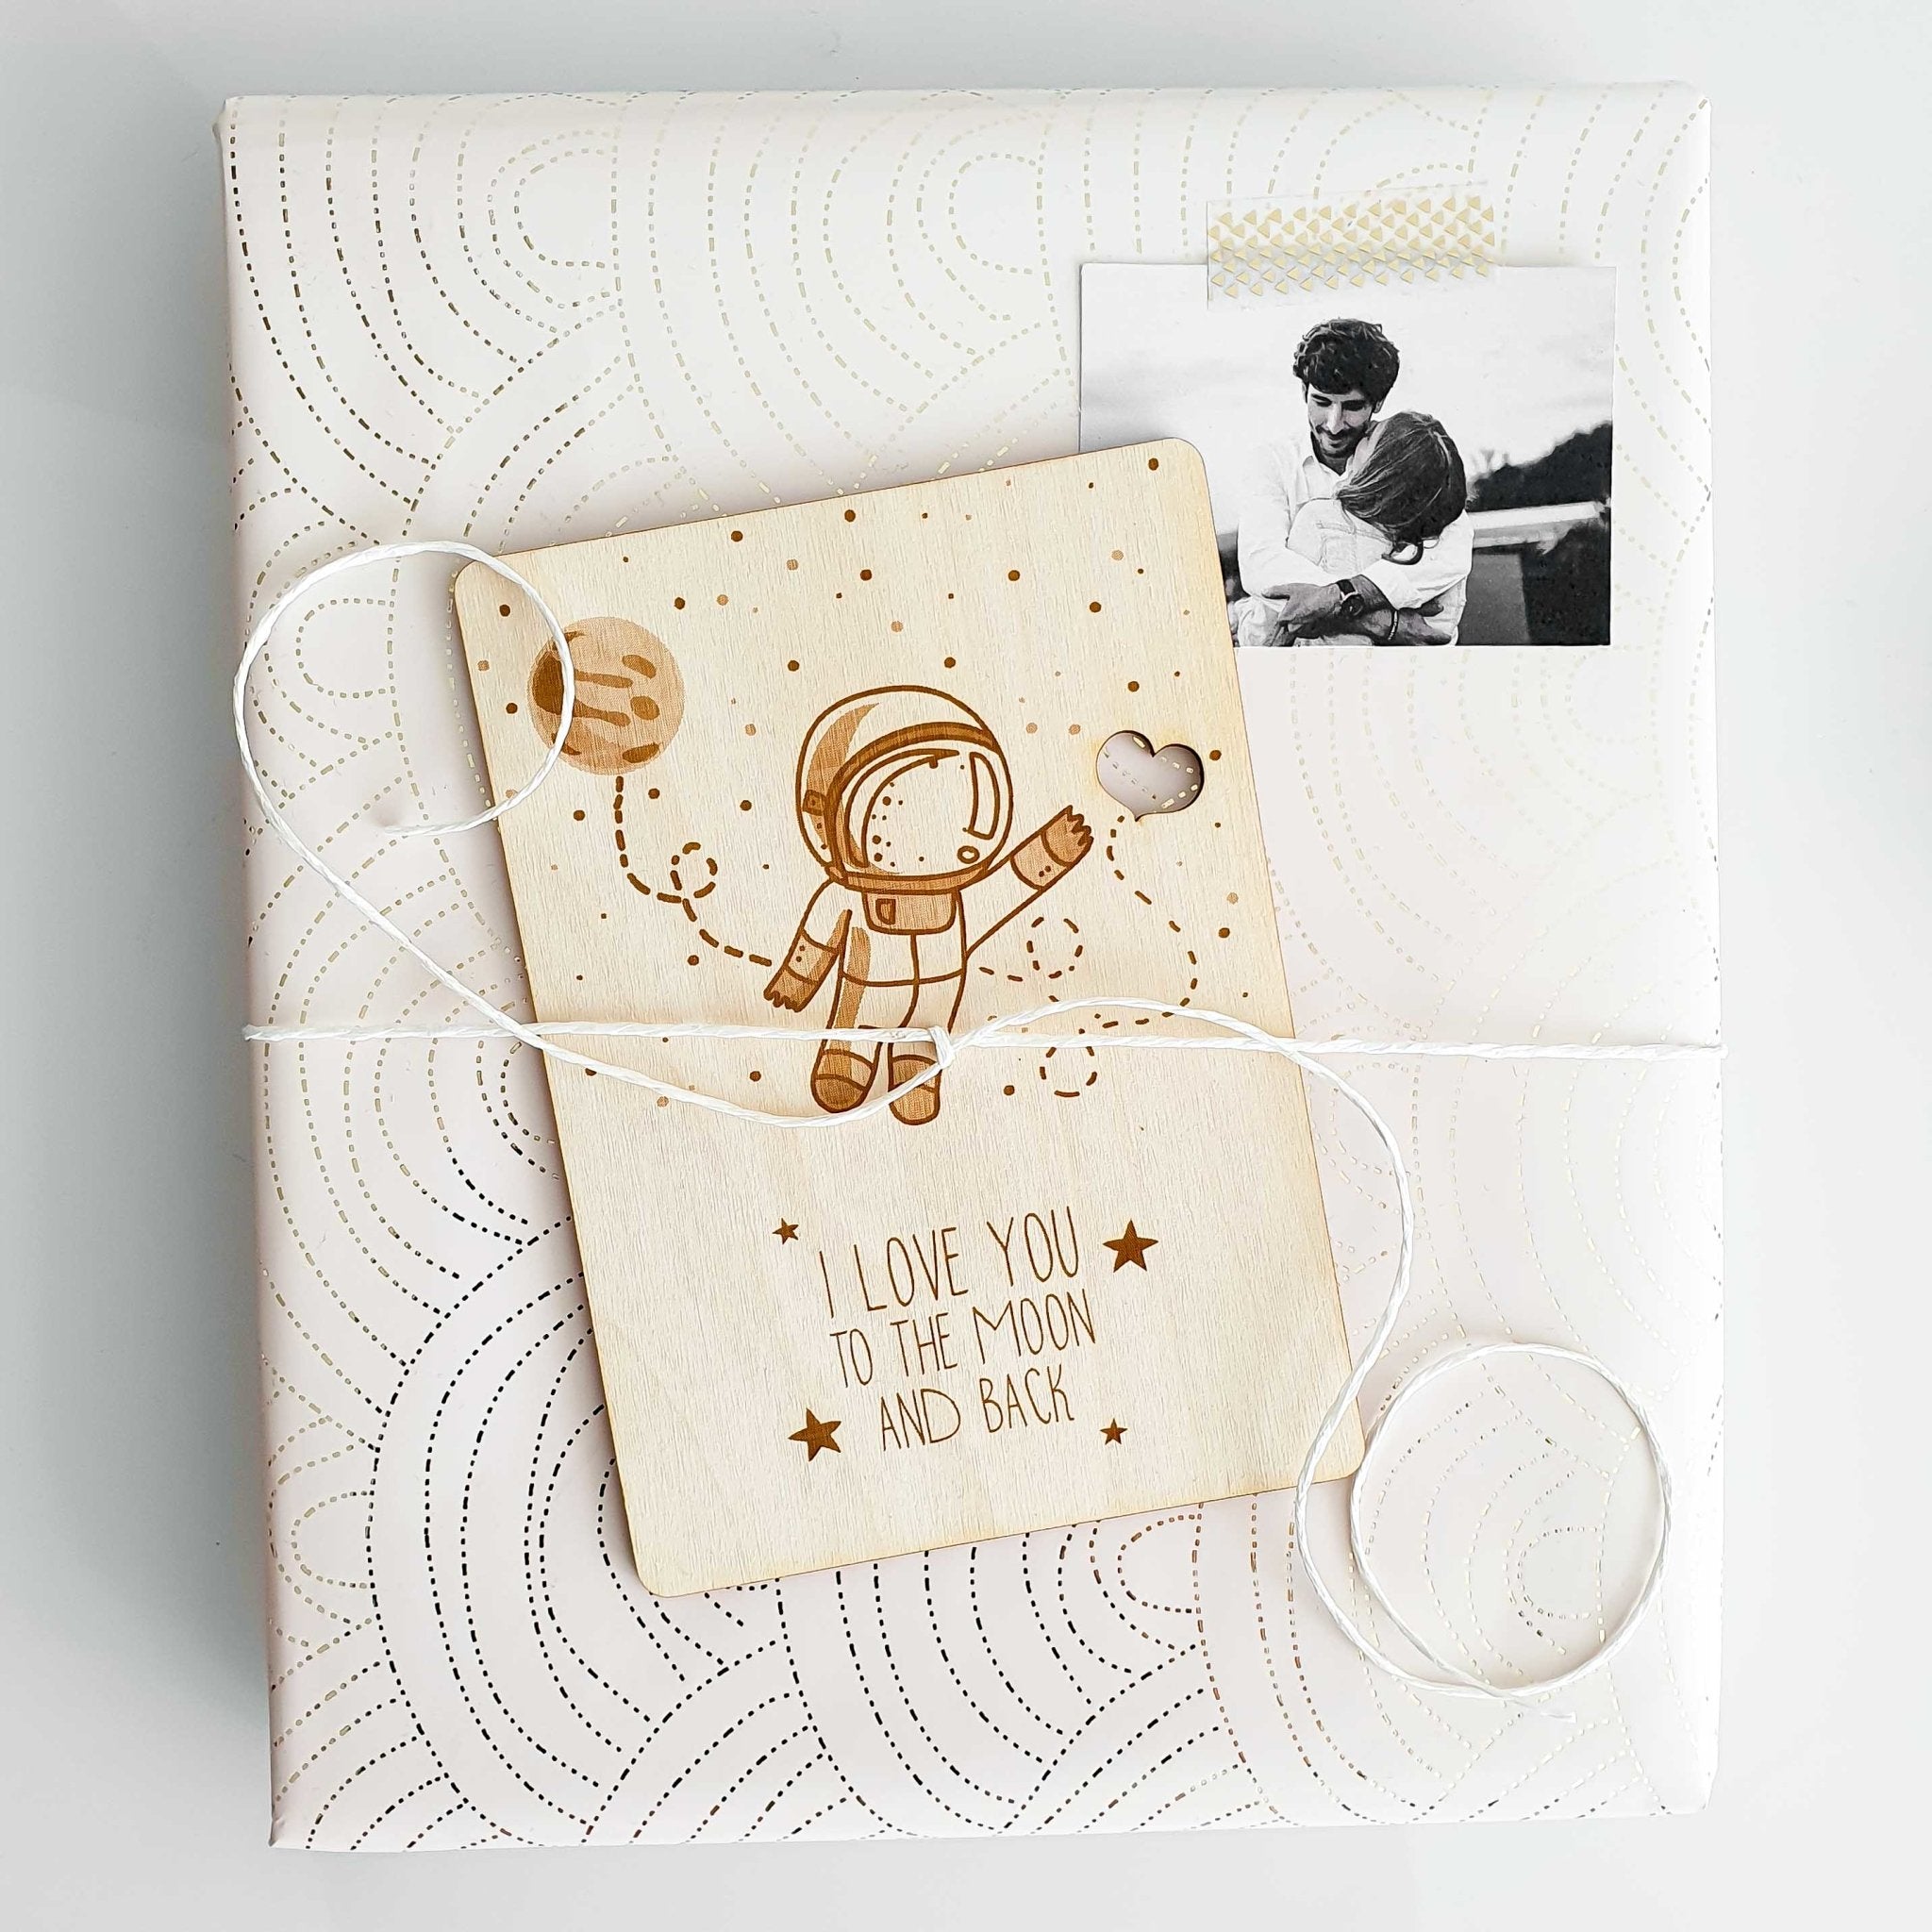 I love you to the moon and back - Geburtstag und Valentinstag Karte - Suzu Papers